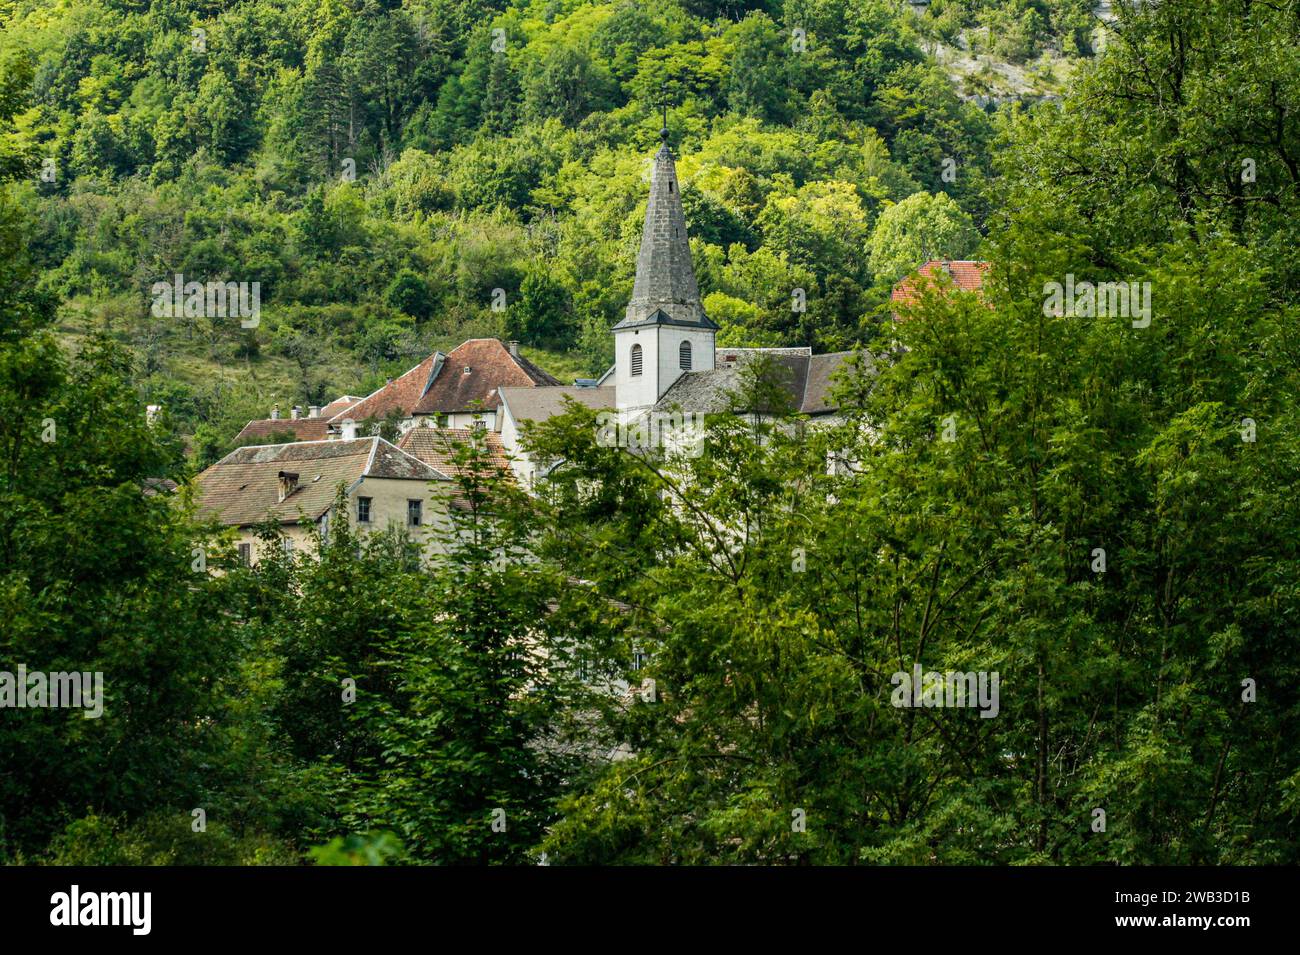 Forest and village of Lods in the valley of La Loue in the region of Bourgogne-Franche-Comté, eastern France Stock Photo